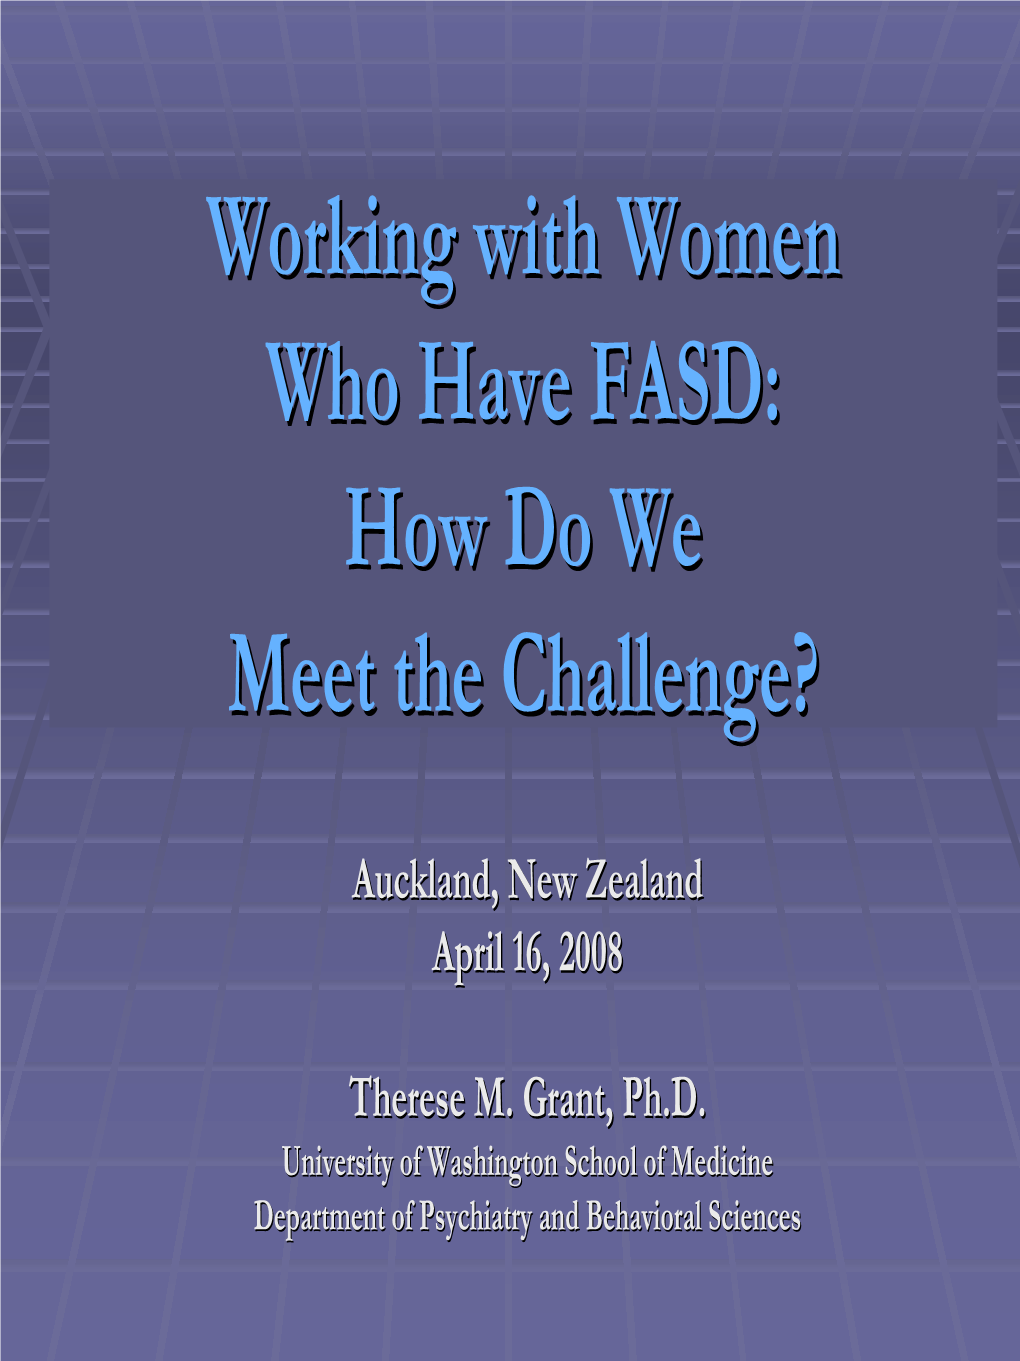 Working with Women Who Have FASD: How Do We Meet The